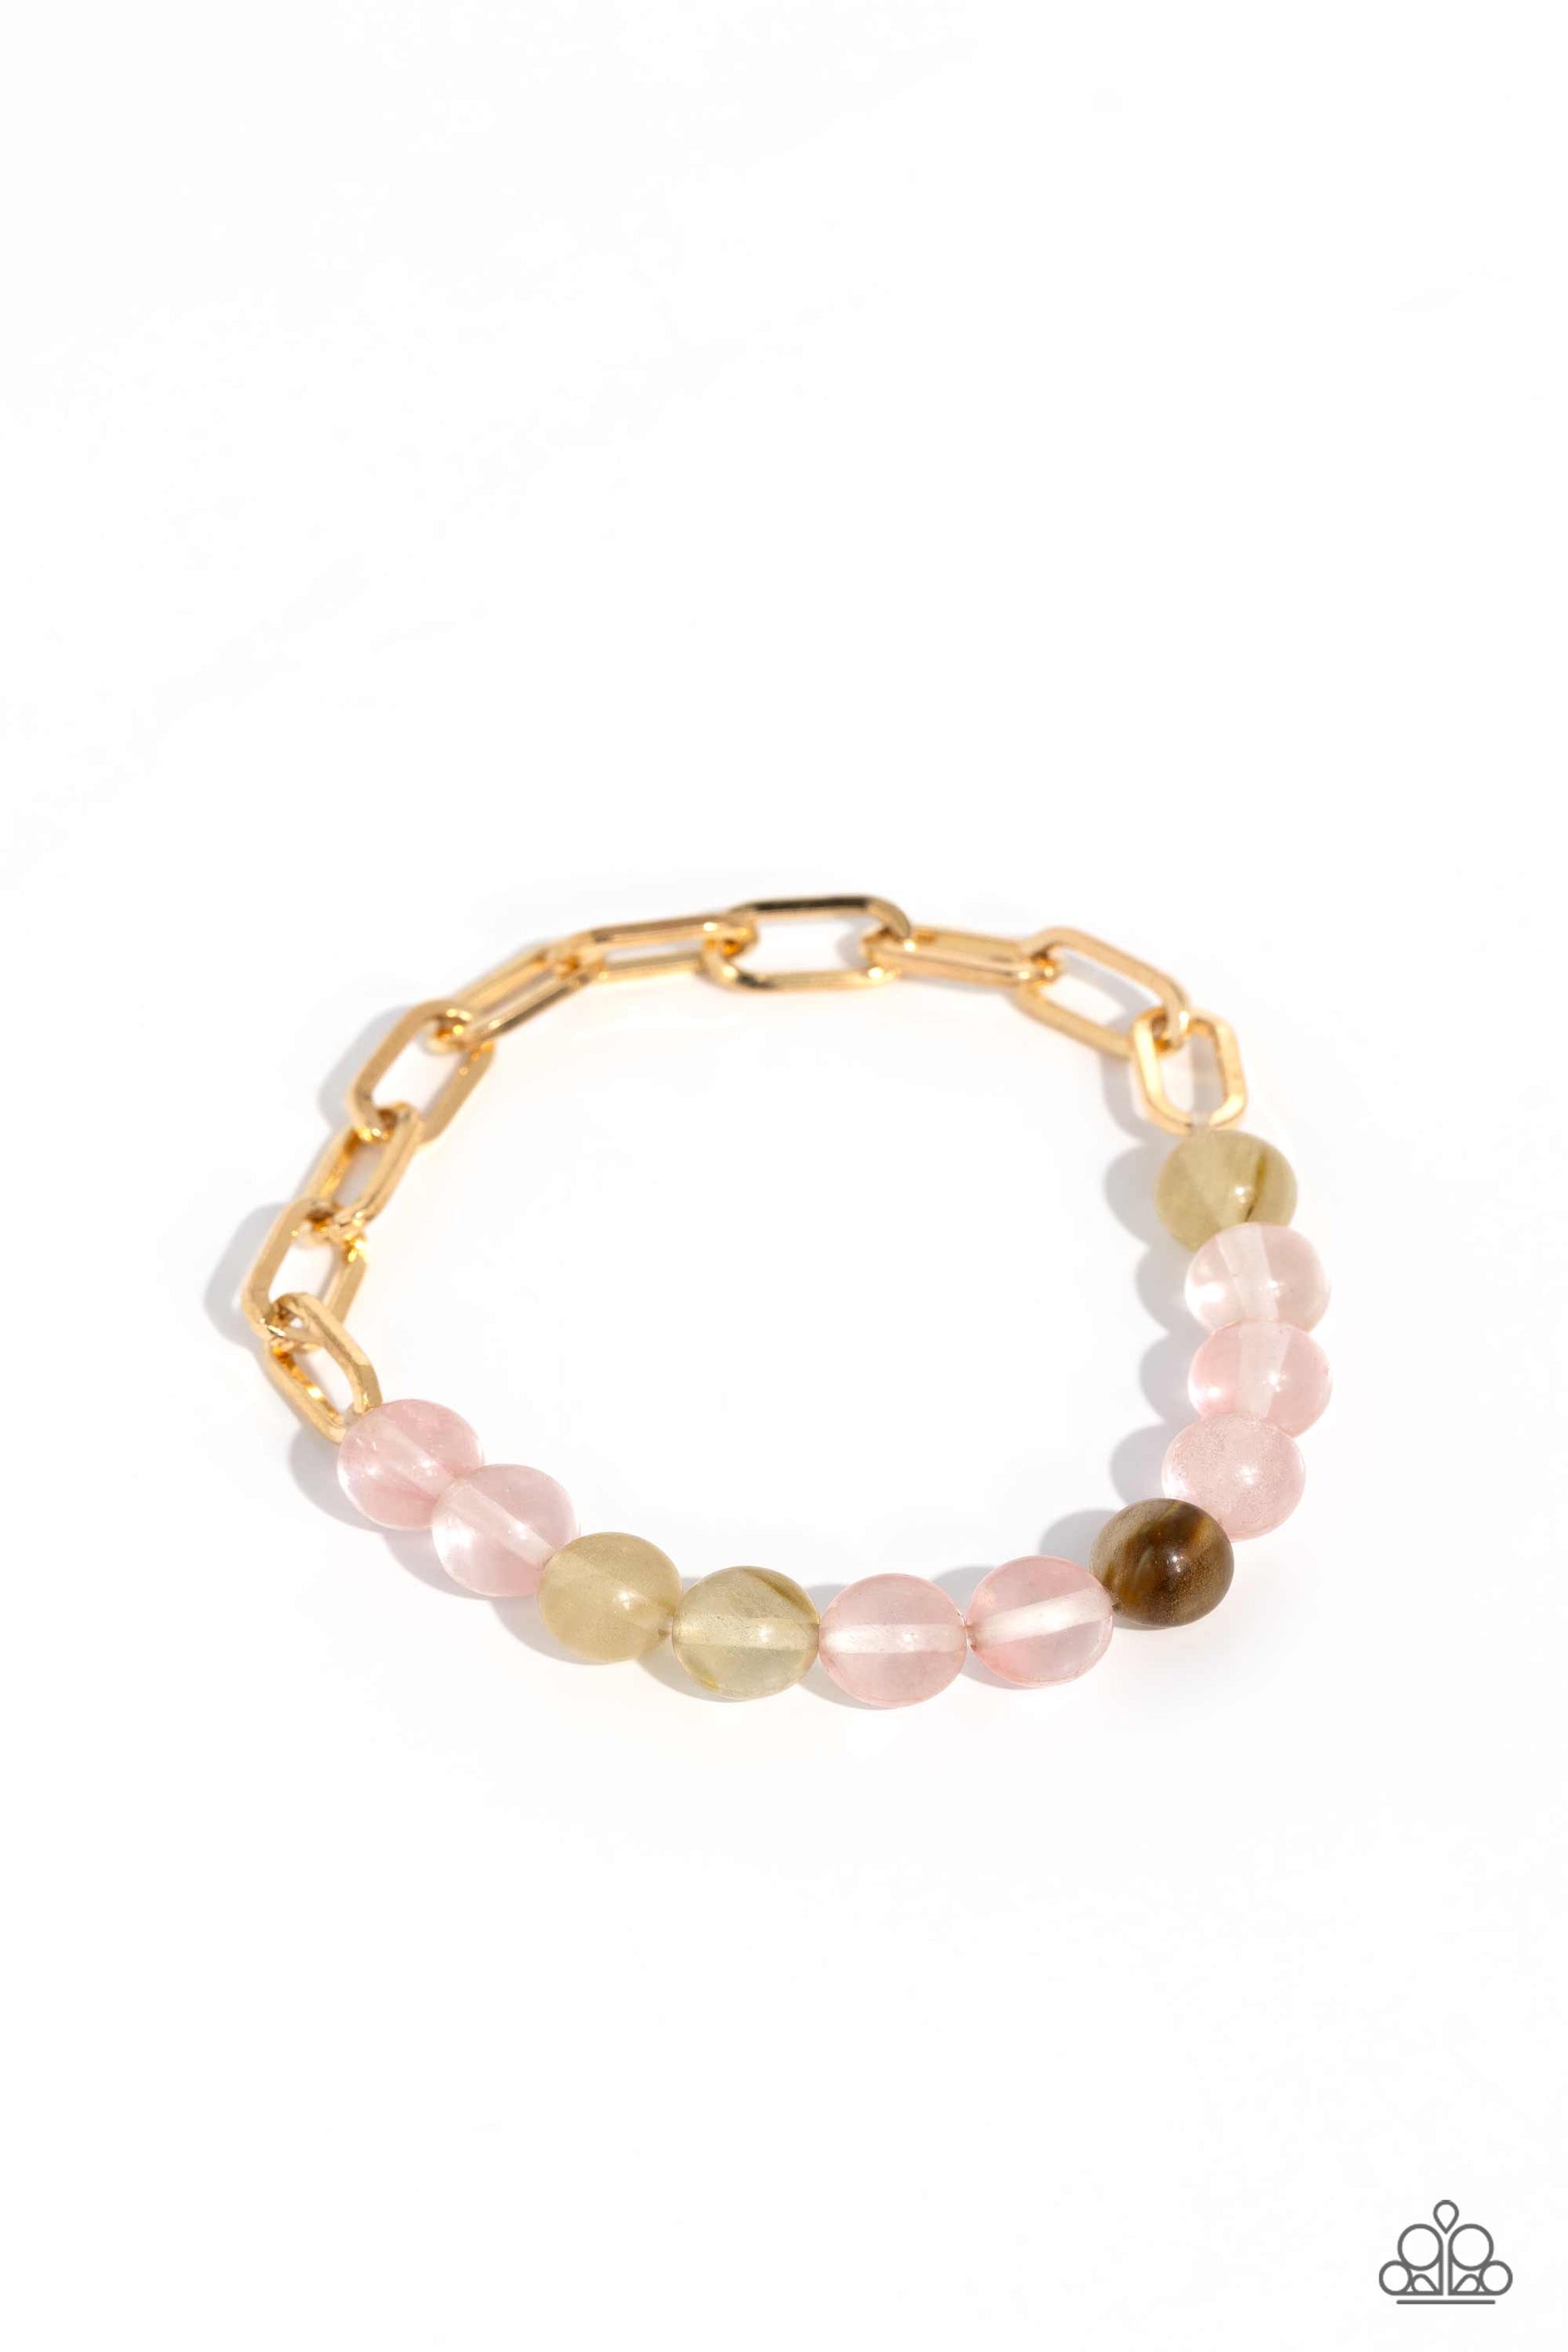 Paparazzi Accessories - Energetic Edge - Pink Bracelet a strand of gold paperclip chain collides with glassy pink stone beads in various hues along a stretchy band to create a seasonally urban statement. As the stone elements in this piece are natural, some color variation is normal.  Sold as one individual bracelet.